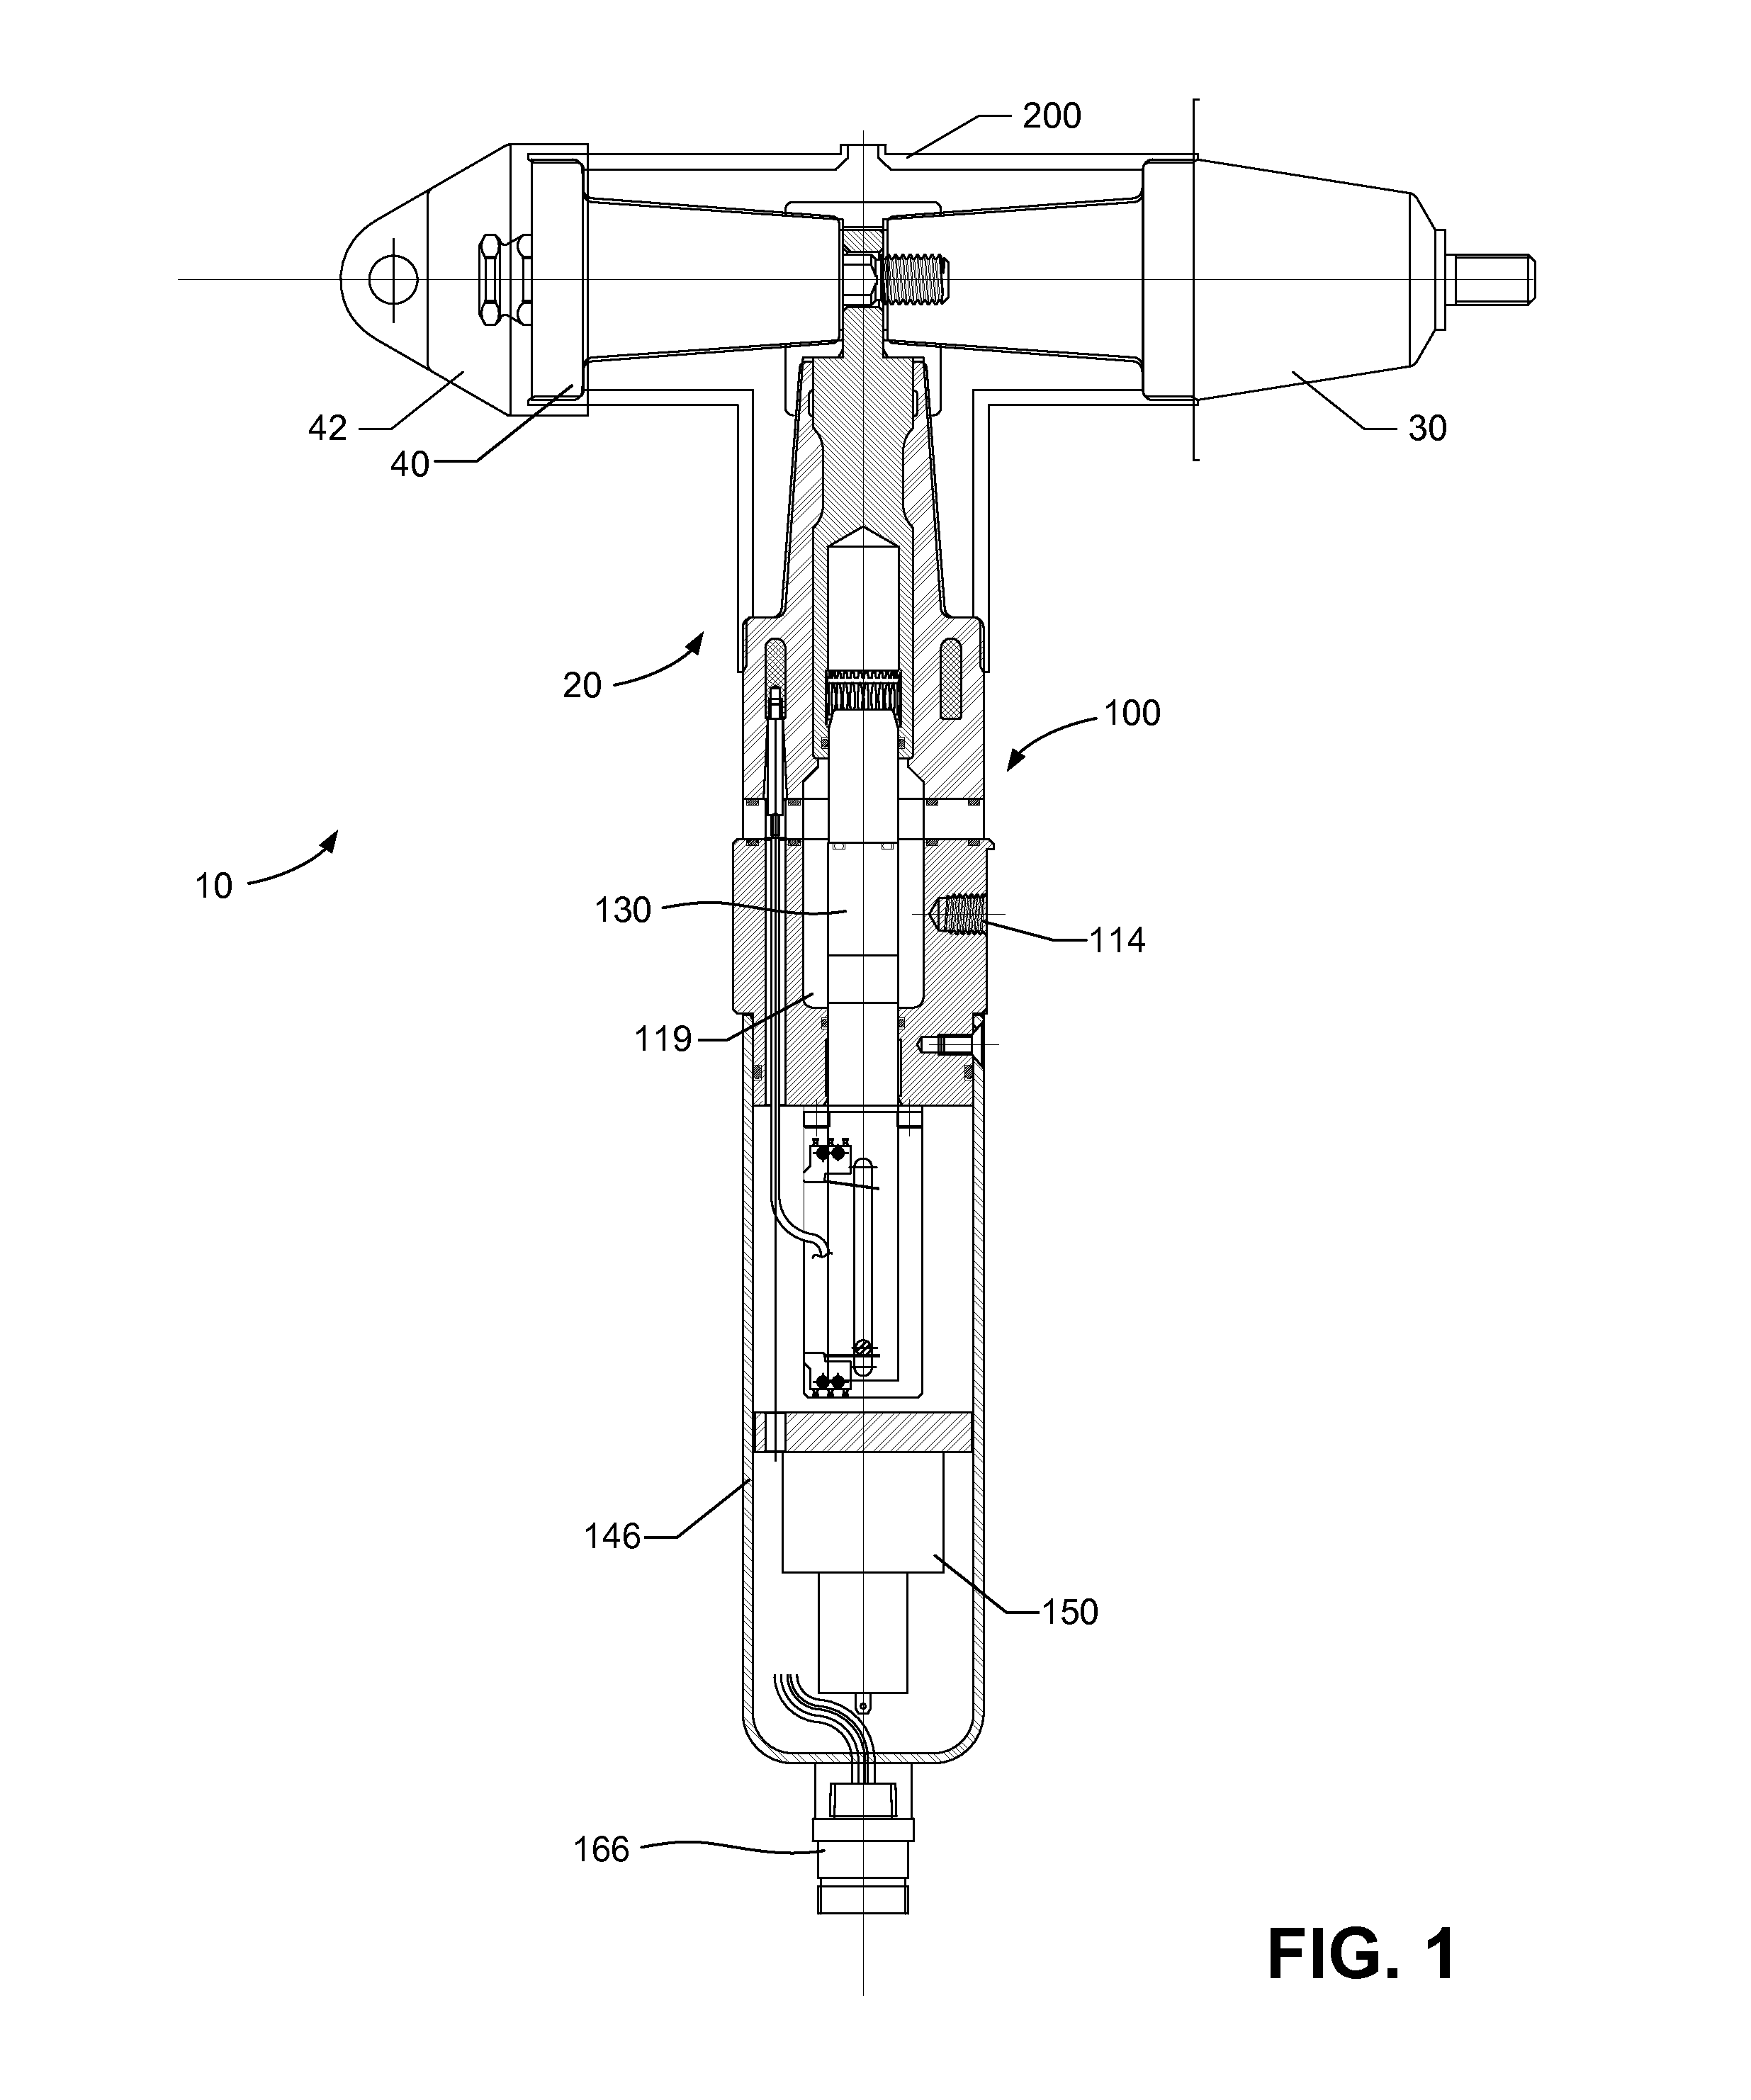 Automated grounding device with visual indication